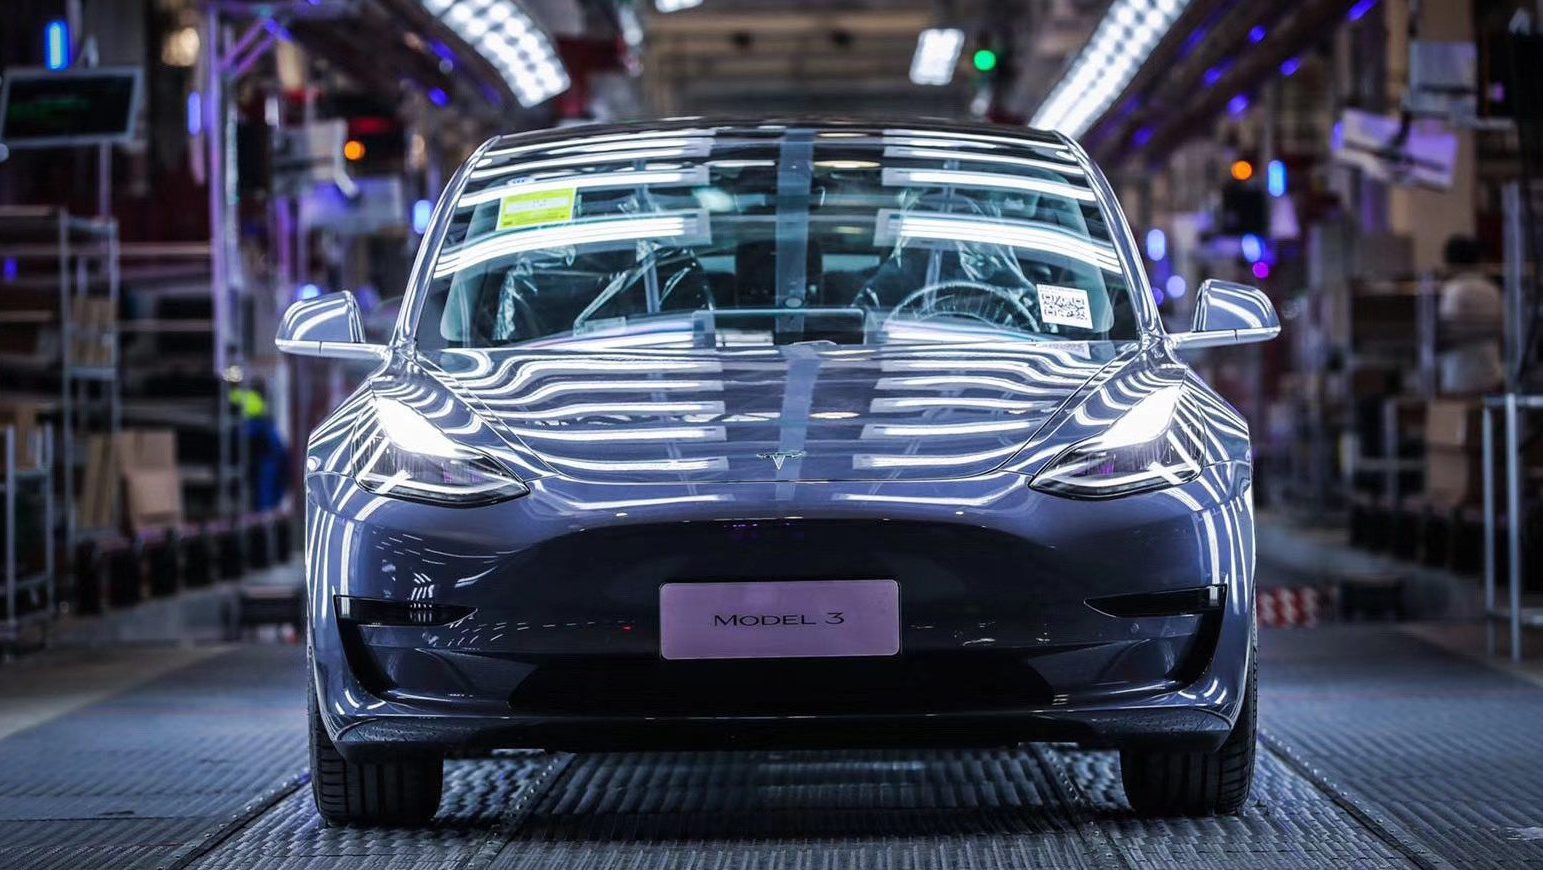 Tesla’s China-made Model 3 will be a cash cow for the automaker as margins set to improve even more